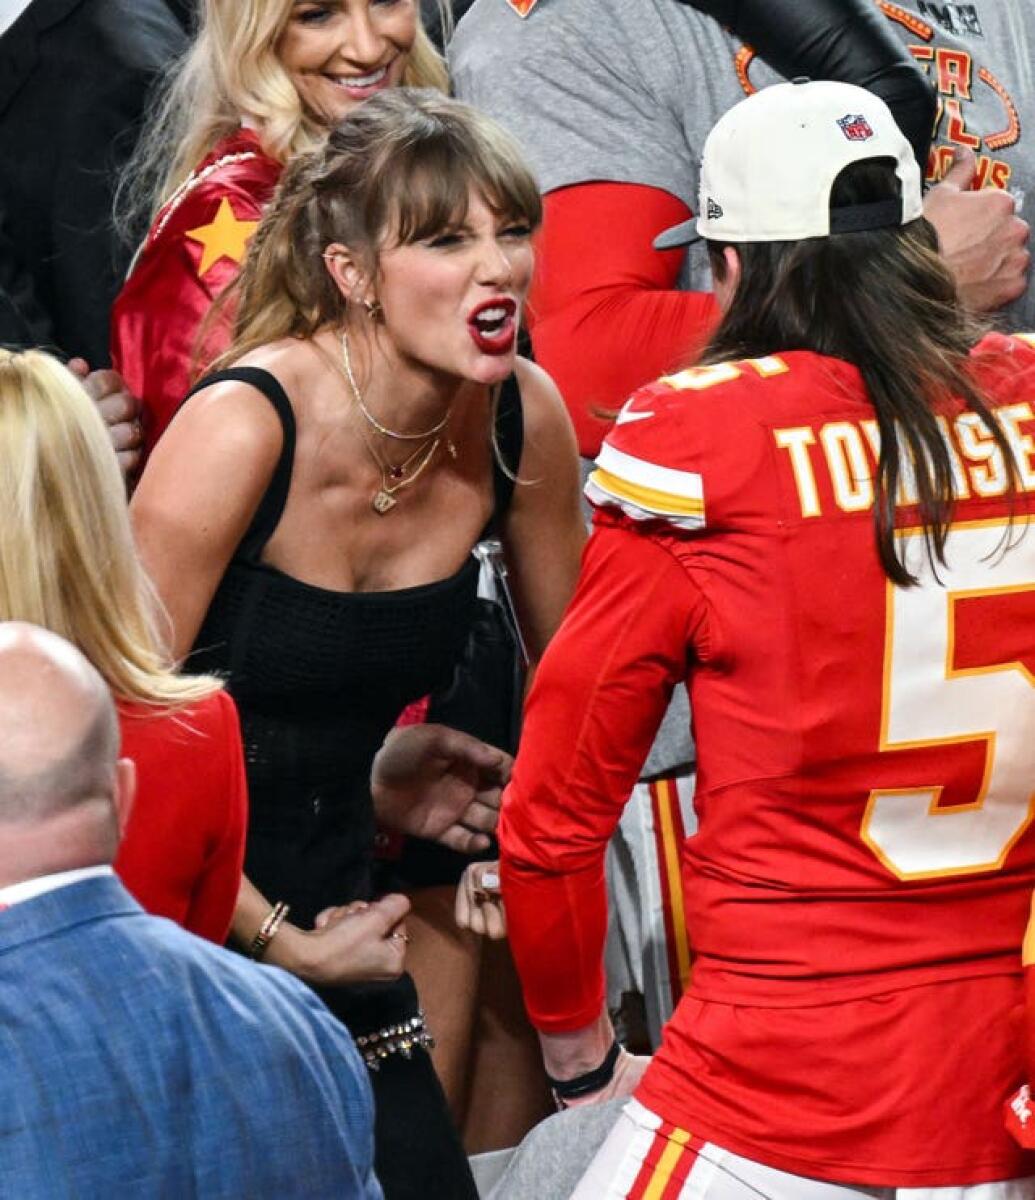 Taylor Swift in black top speaking to Kansas City Chiefs player in red jersey